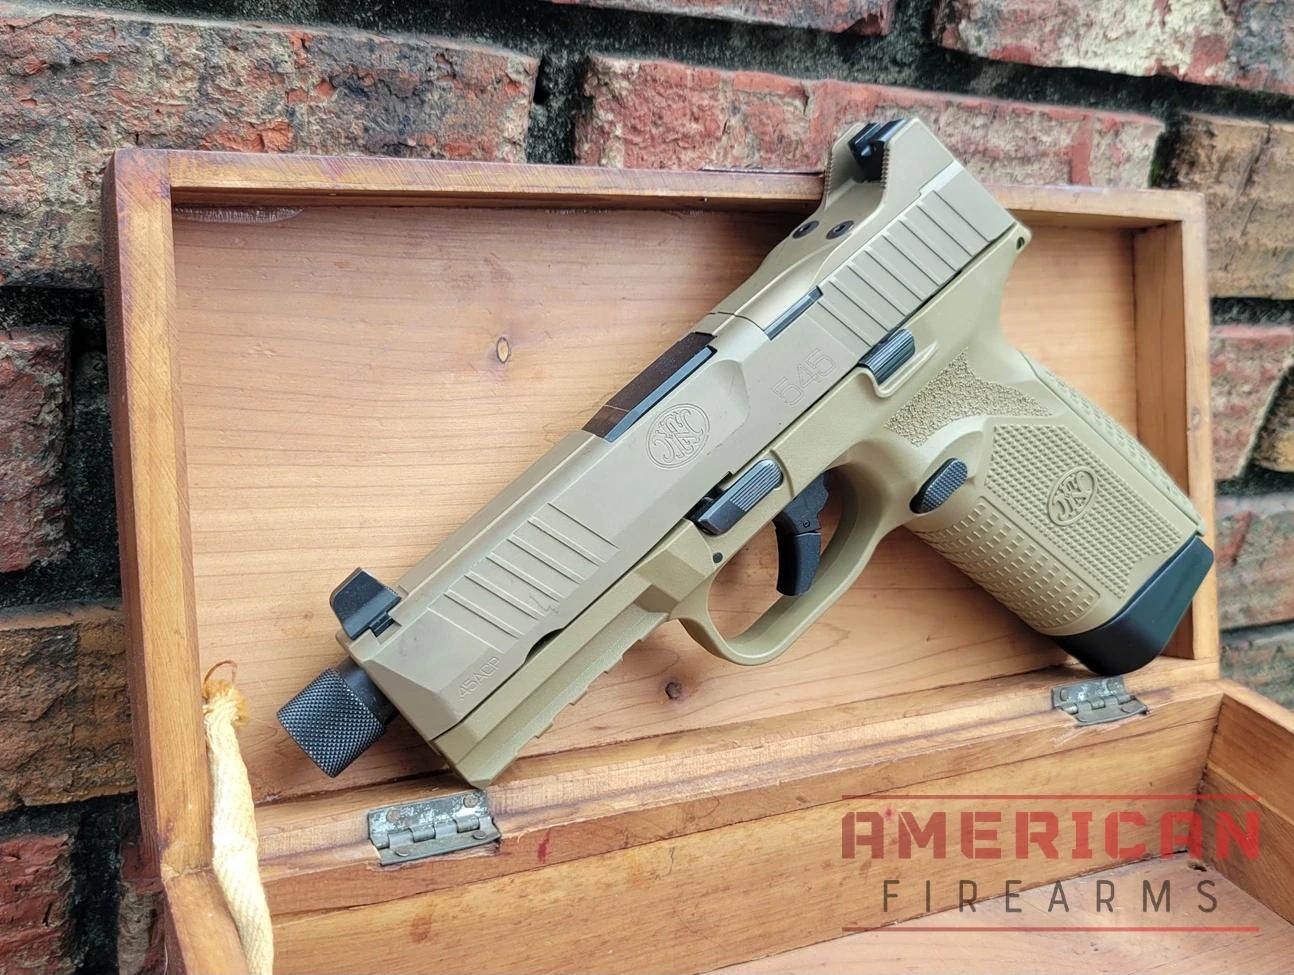 The FN 545 has a fully ambidextrous slide stop lever and magazine release that work without issue.